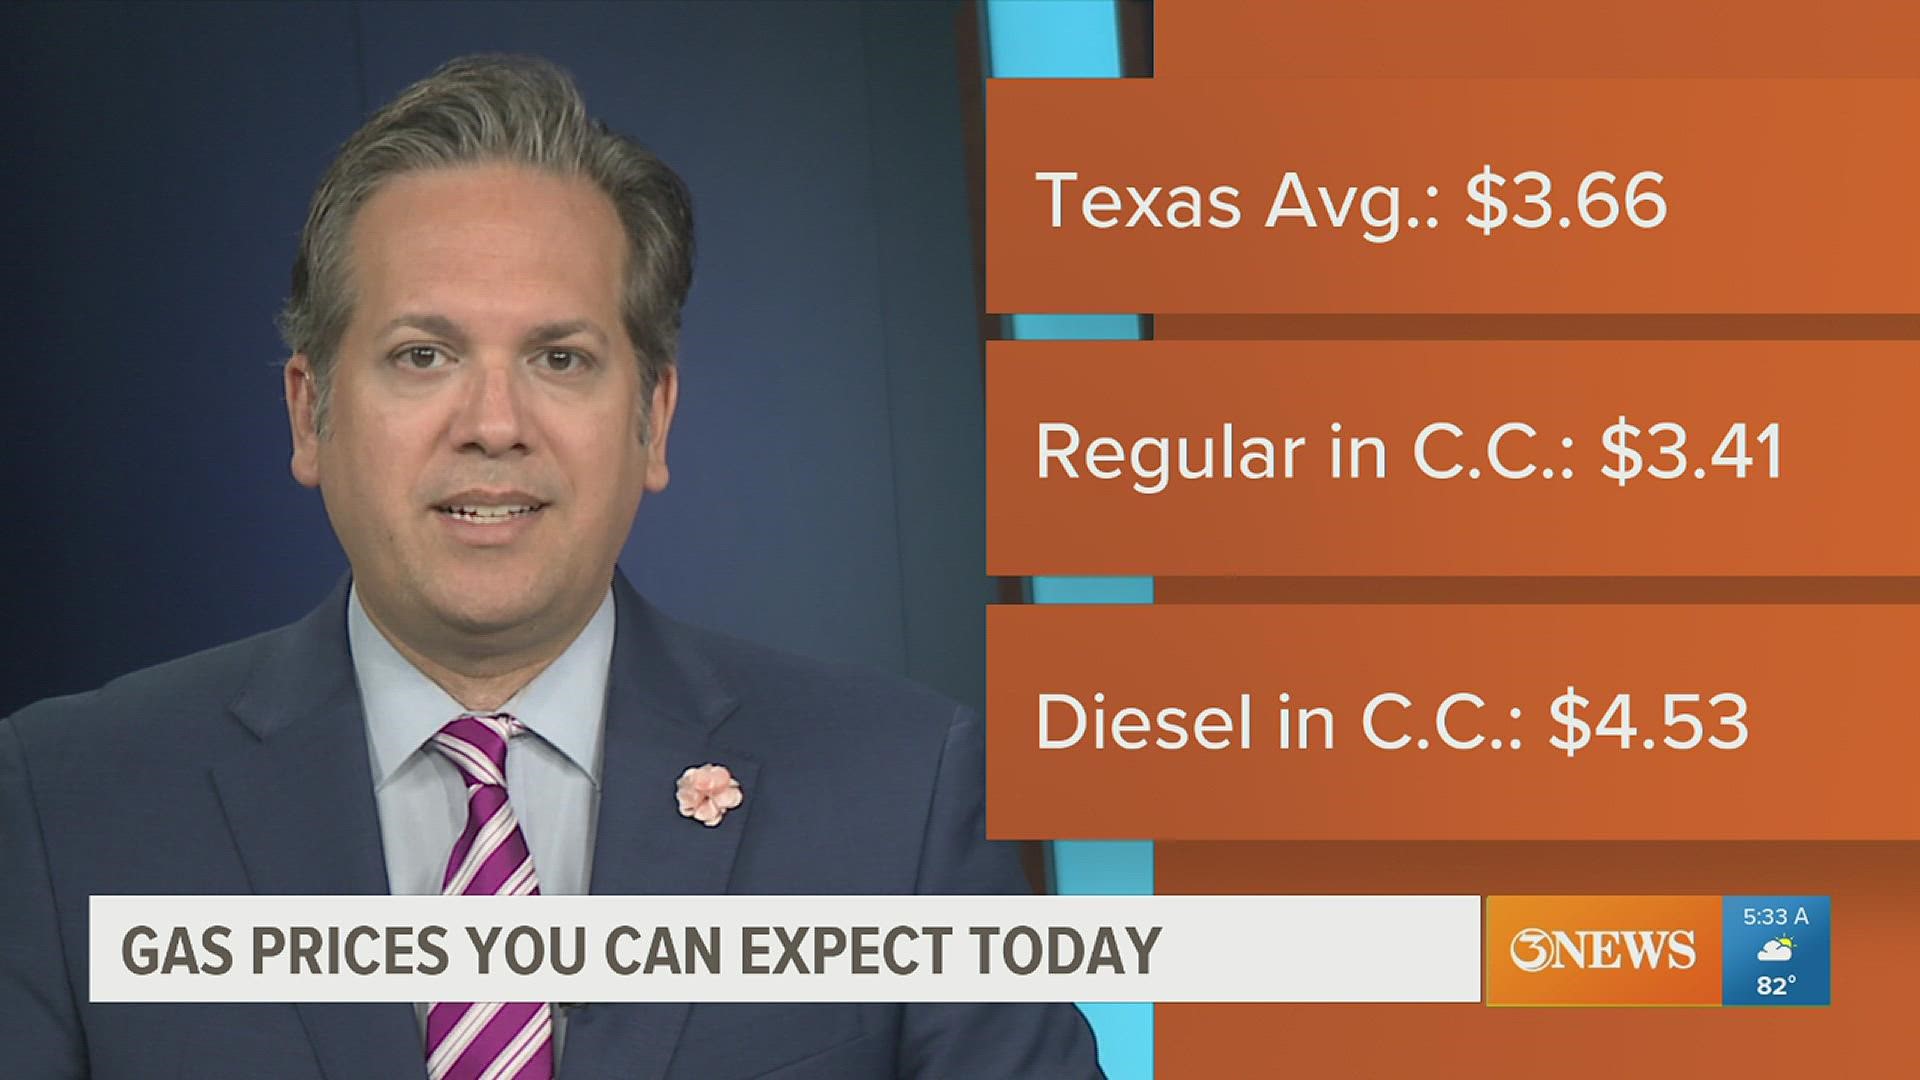 The average price for a gallon of unleaded gas in Corpus Christi is $3.41.